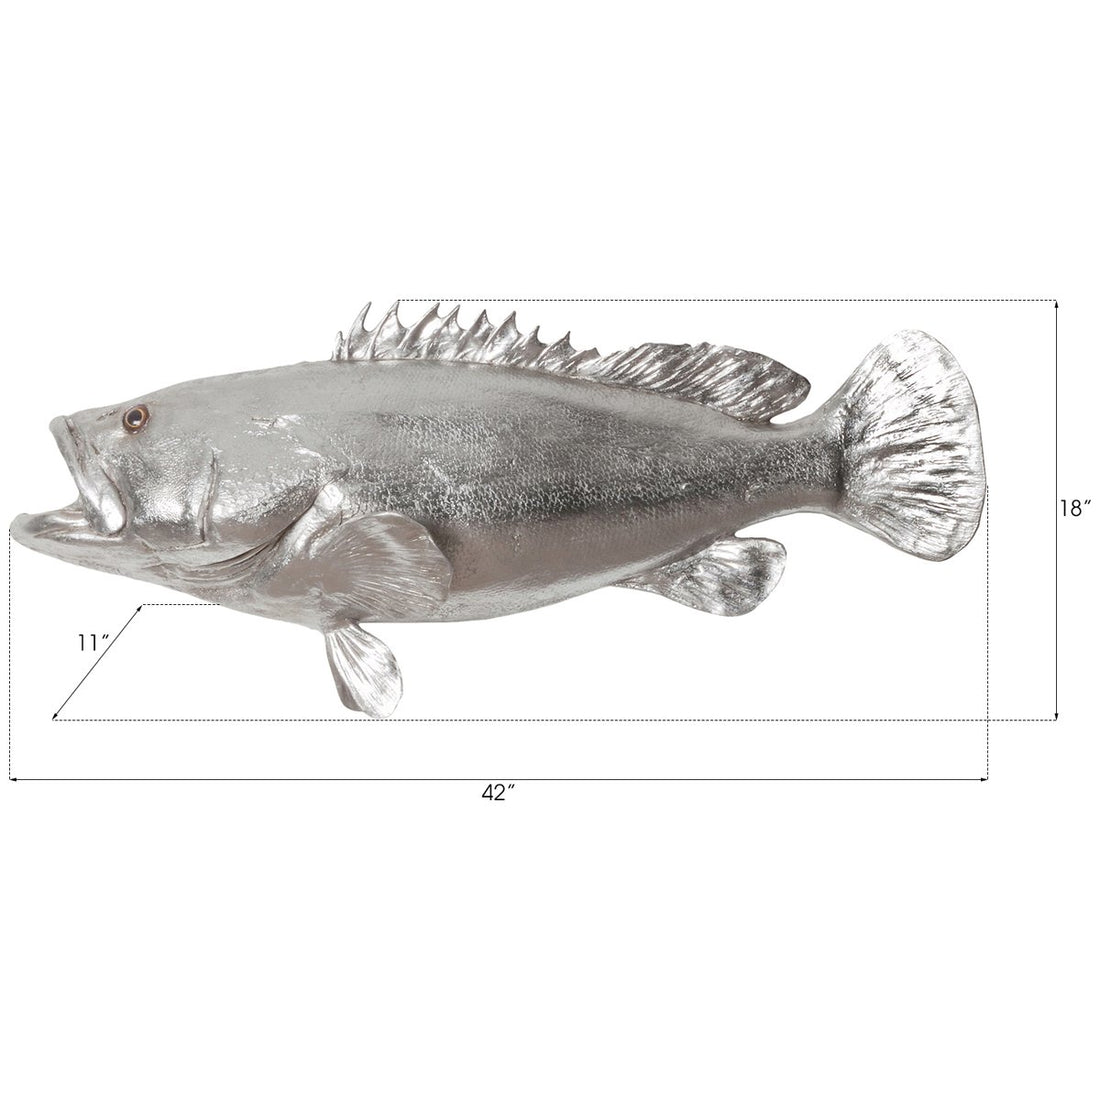 Phillips Collection Estuary Cod Fish Wall Sculpture, Silver Leaf